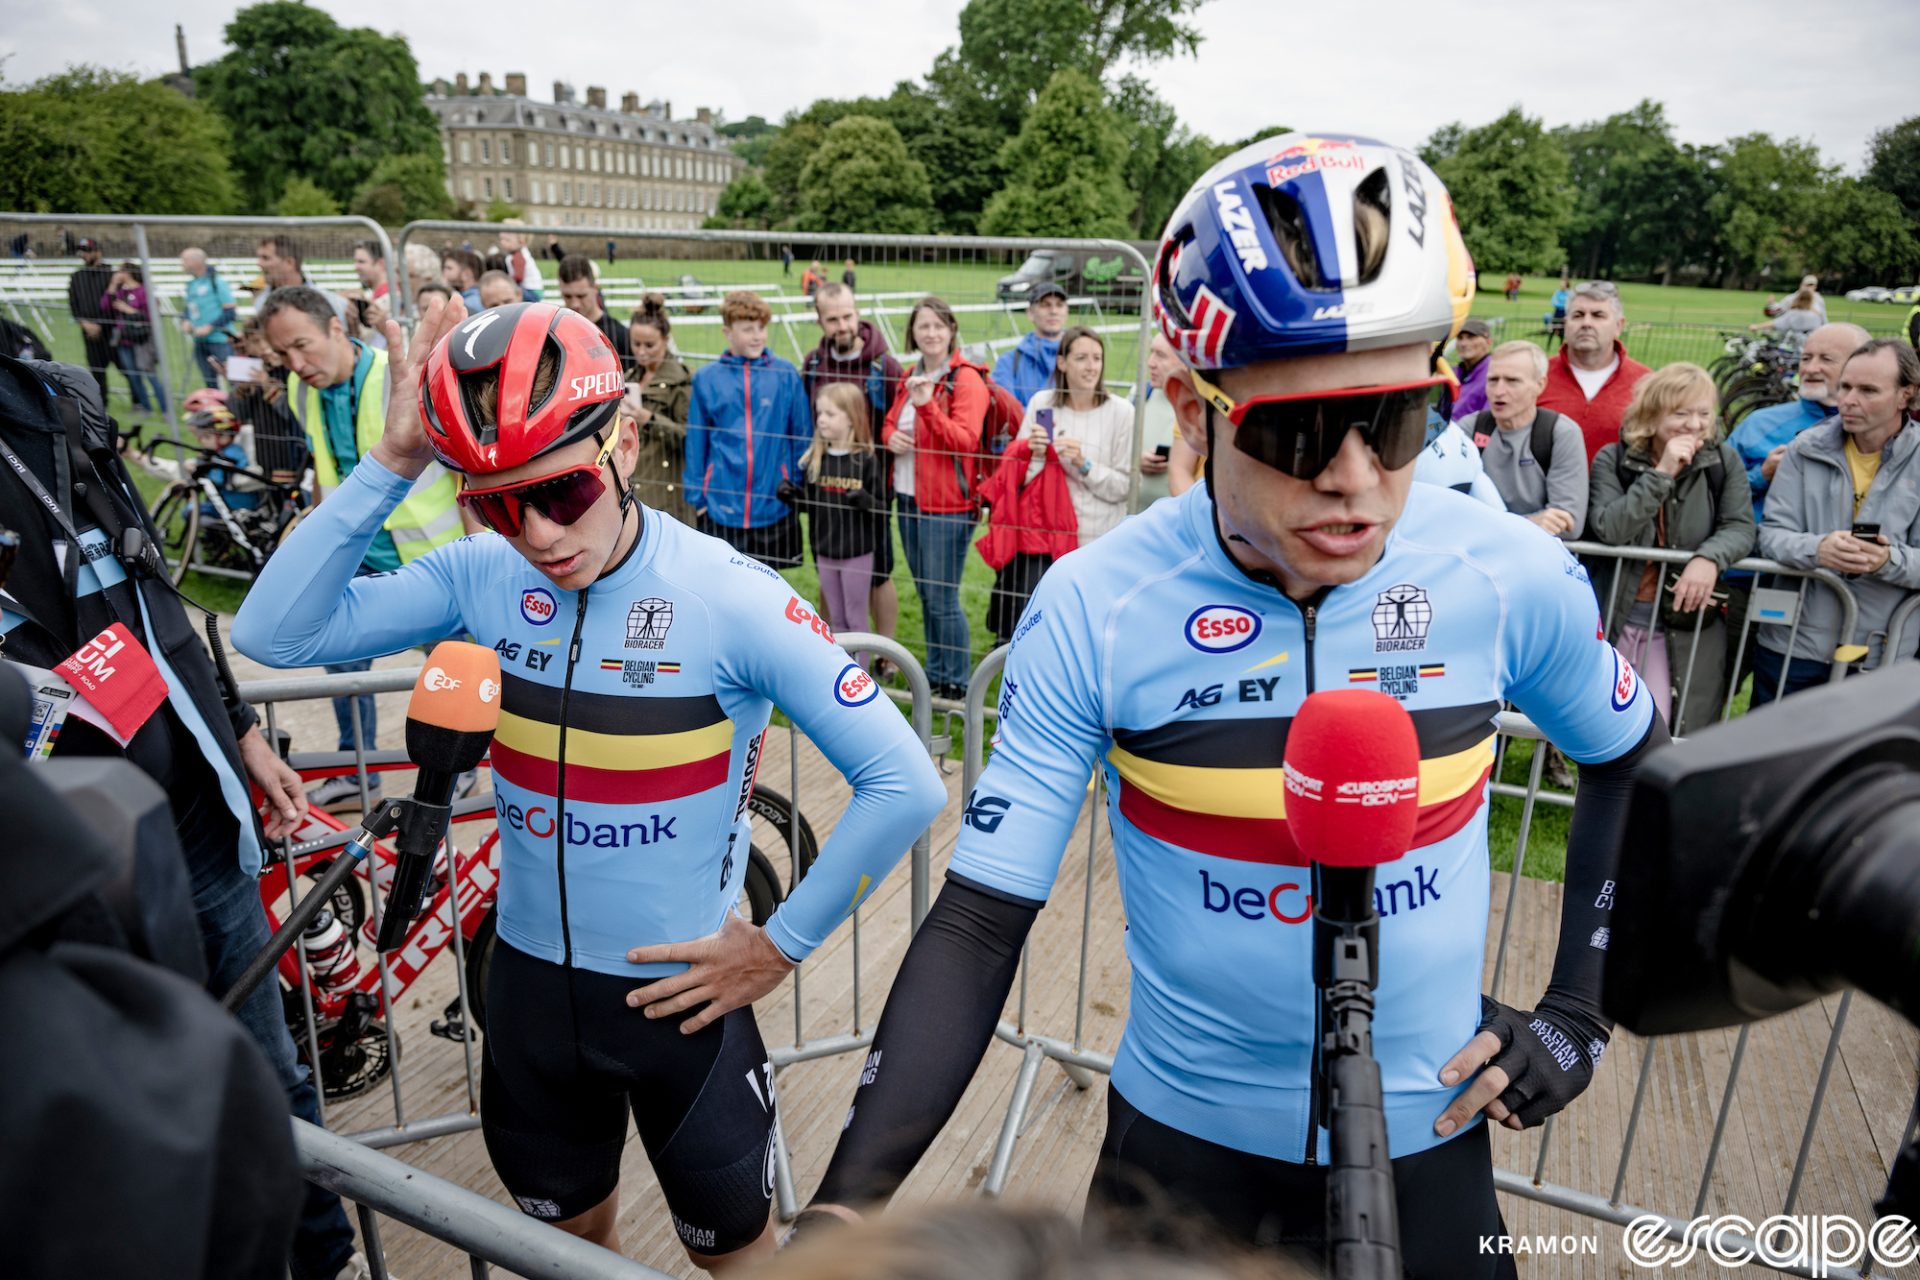 Remco Evenepoel and Wout van Aert speak with assembled media at the start of the 2023 men's World Championship road race in Glasgow, Scotland.